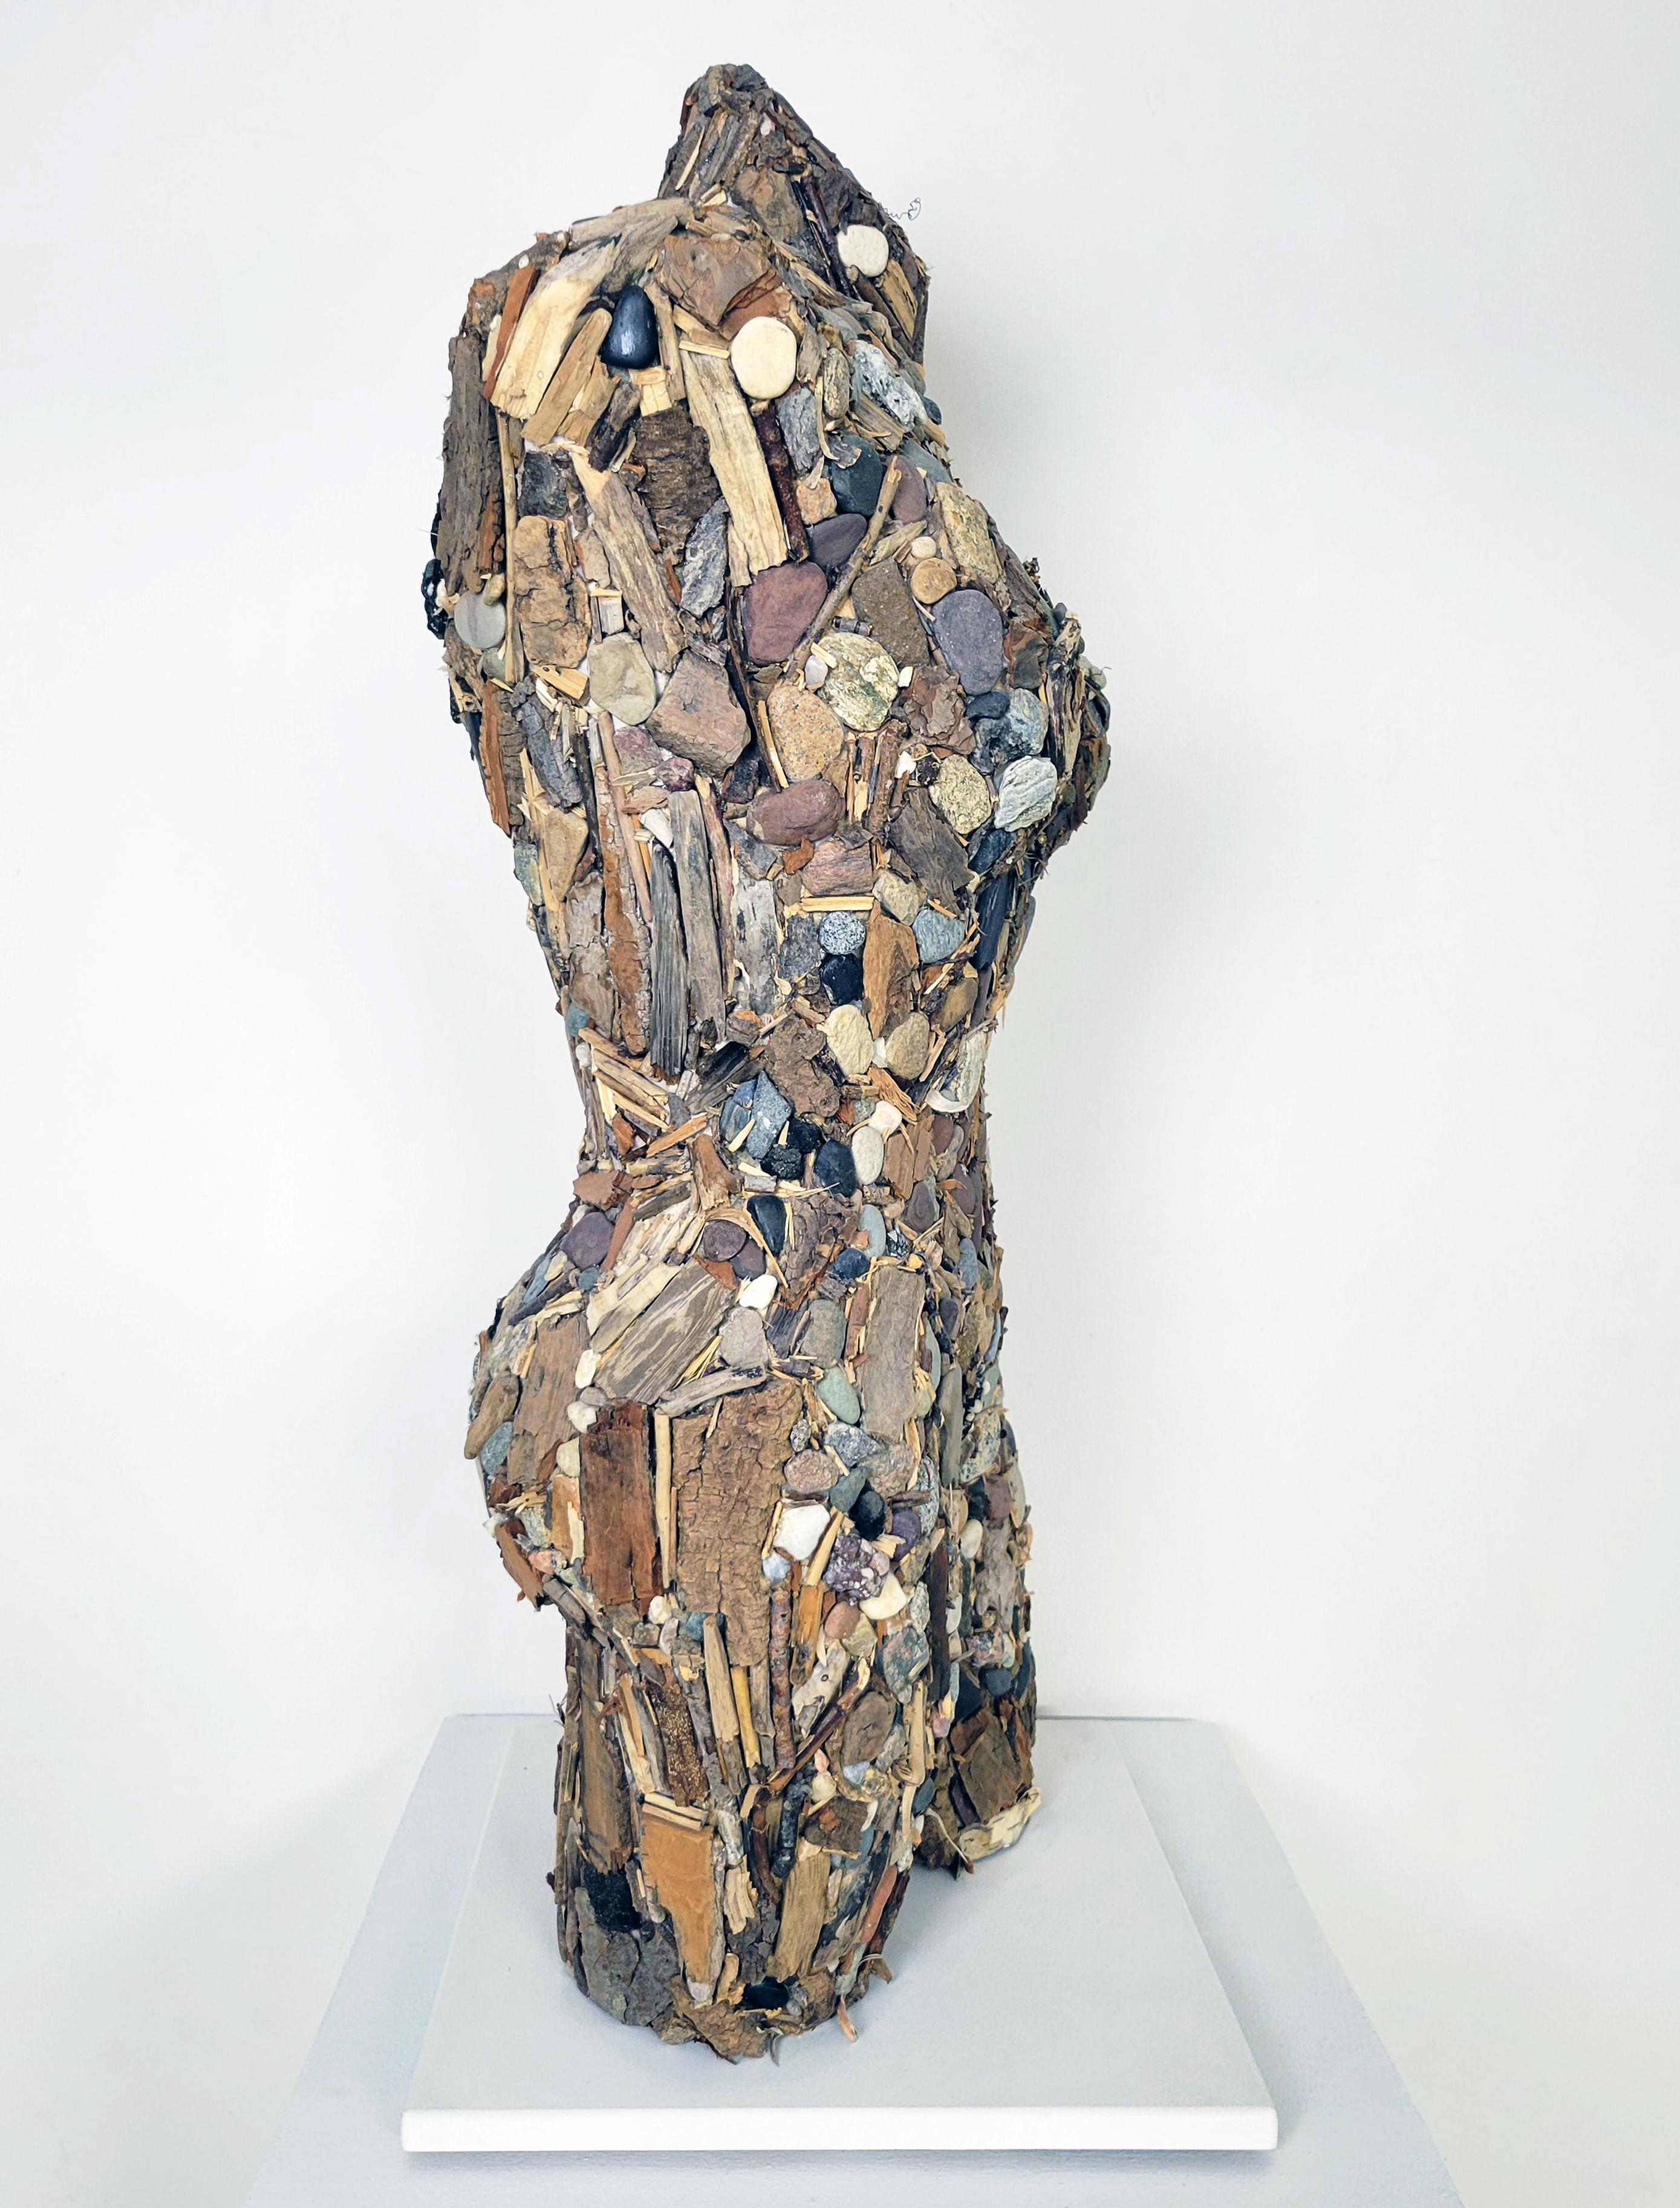 This sculpture from Linda Stein’s I am the Environment series explores the artist's relationship to the earth and addresses the interconnectedness of all living things.  This sculpture is made from found stone, wood and sticks in pleasing earth